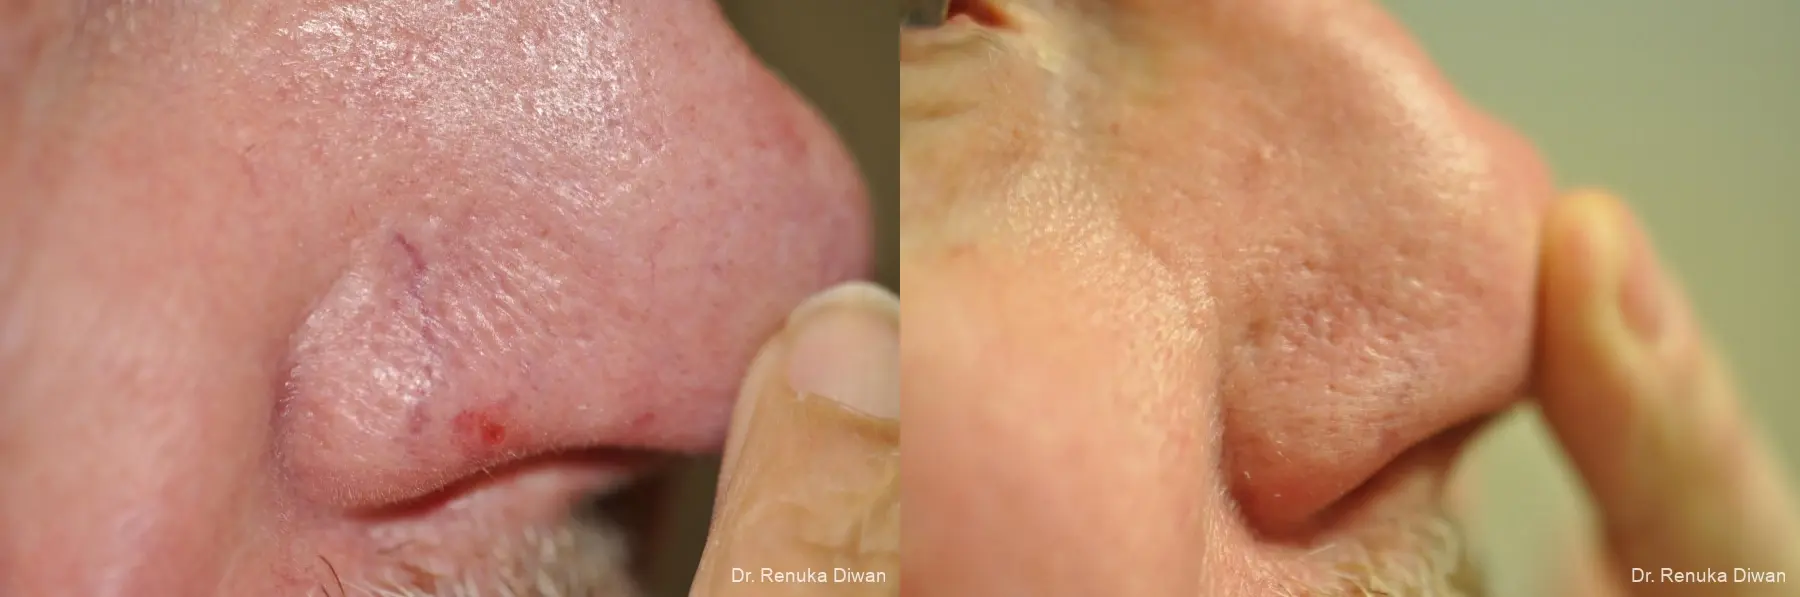 Laser For Veins And Redness For Men: Patient 11 - Before and After 1